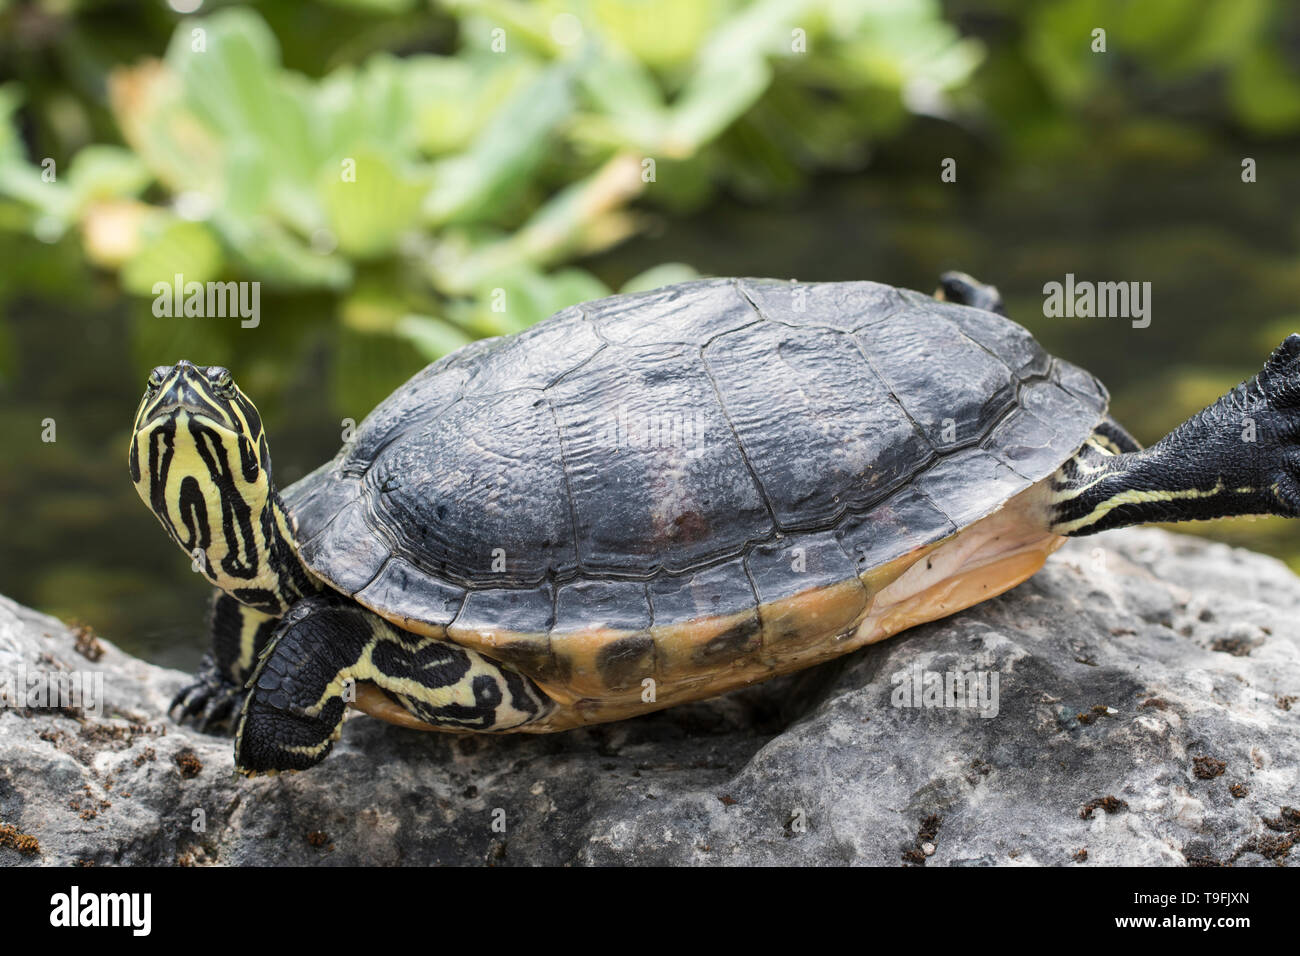 Mindfulness meditation turtle close up relaxing on rocks sunbathing.  Peaceful and quiet animals. Cute cold blooded turtle up close Stock Photo -  Alamy